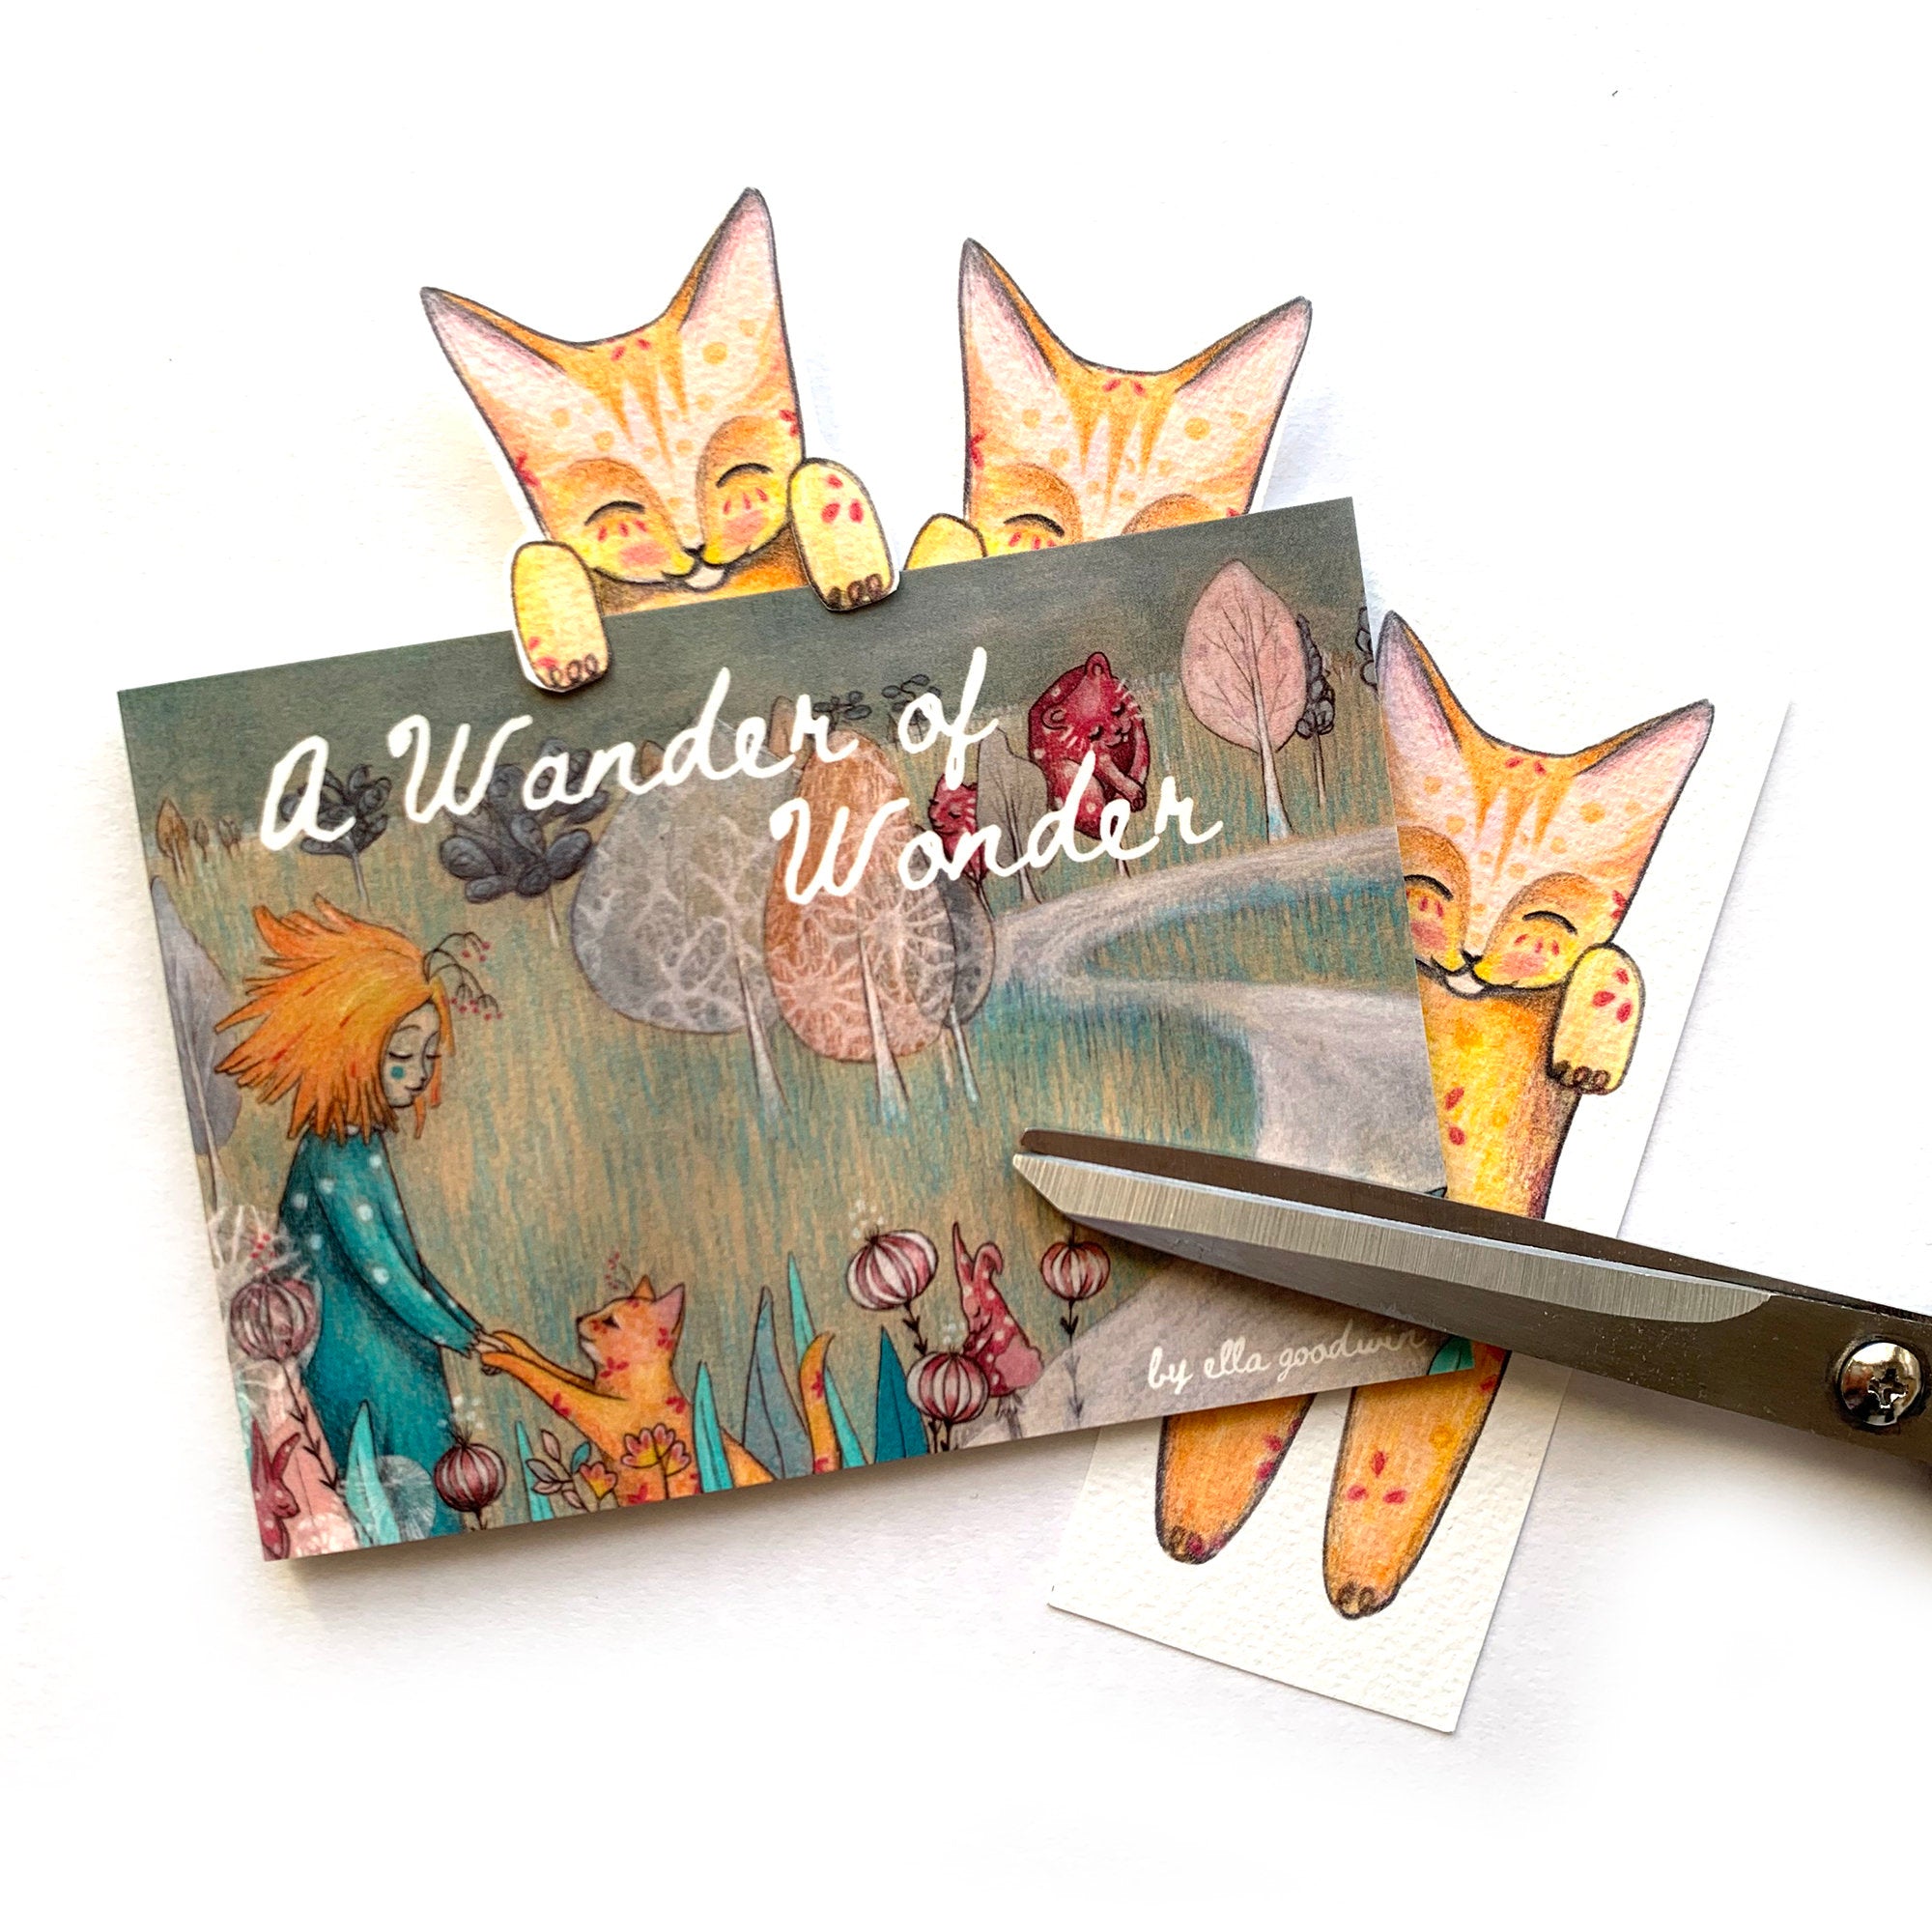 A Wander of Wonder - 22 page illustrated book to uplift the soul!